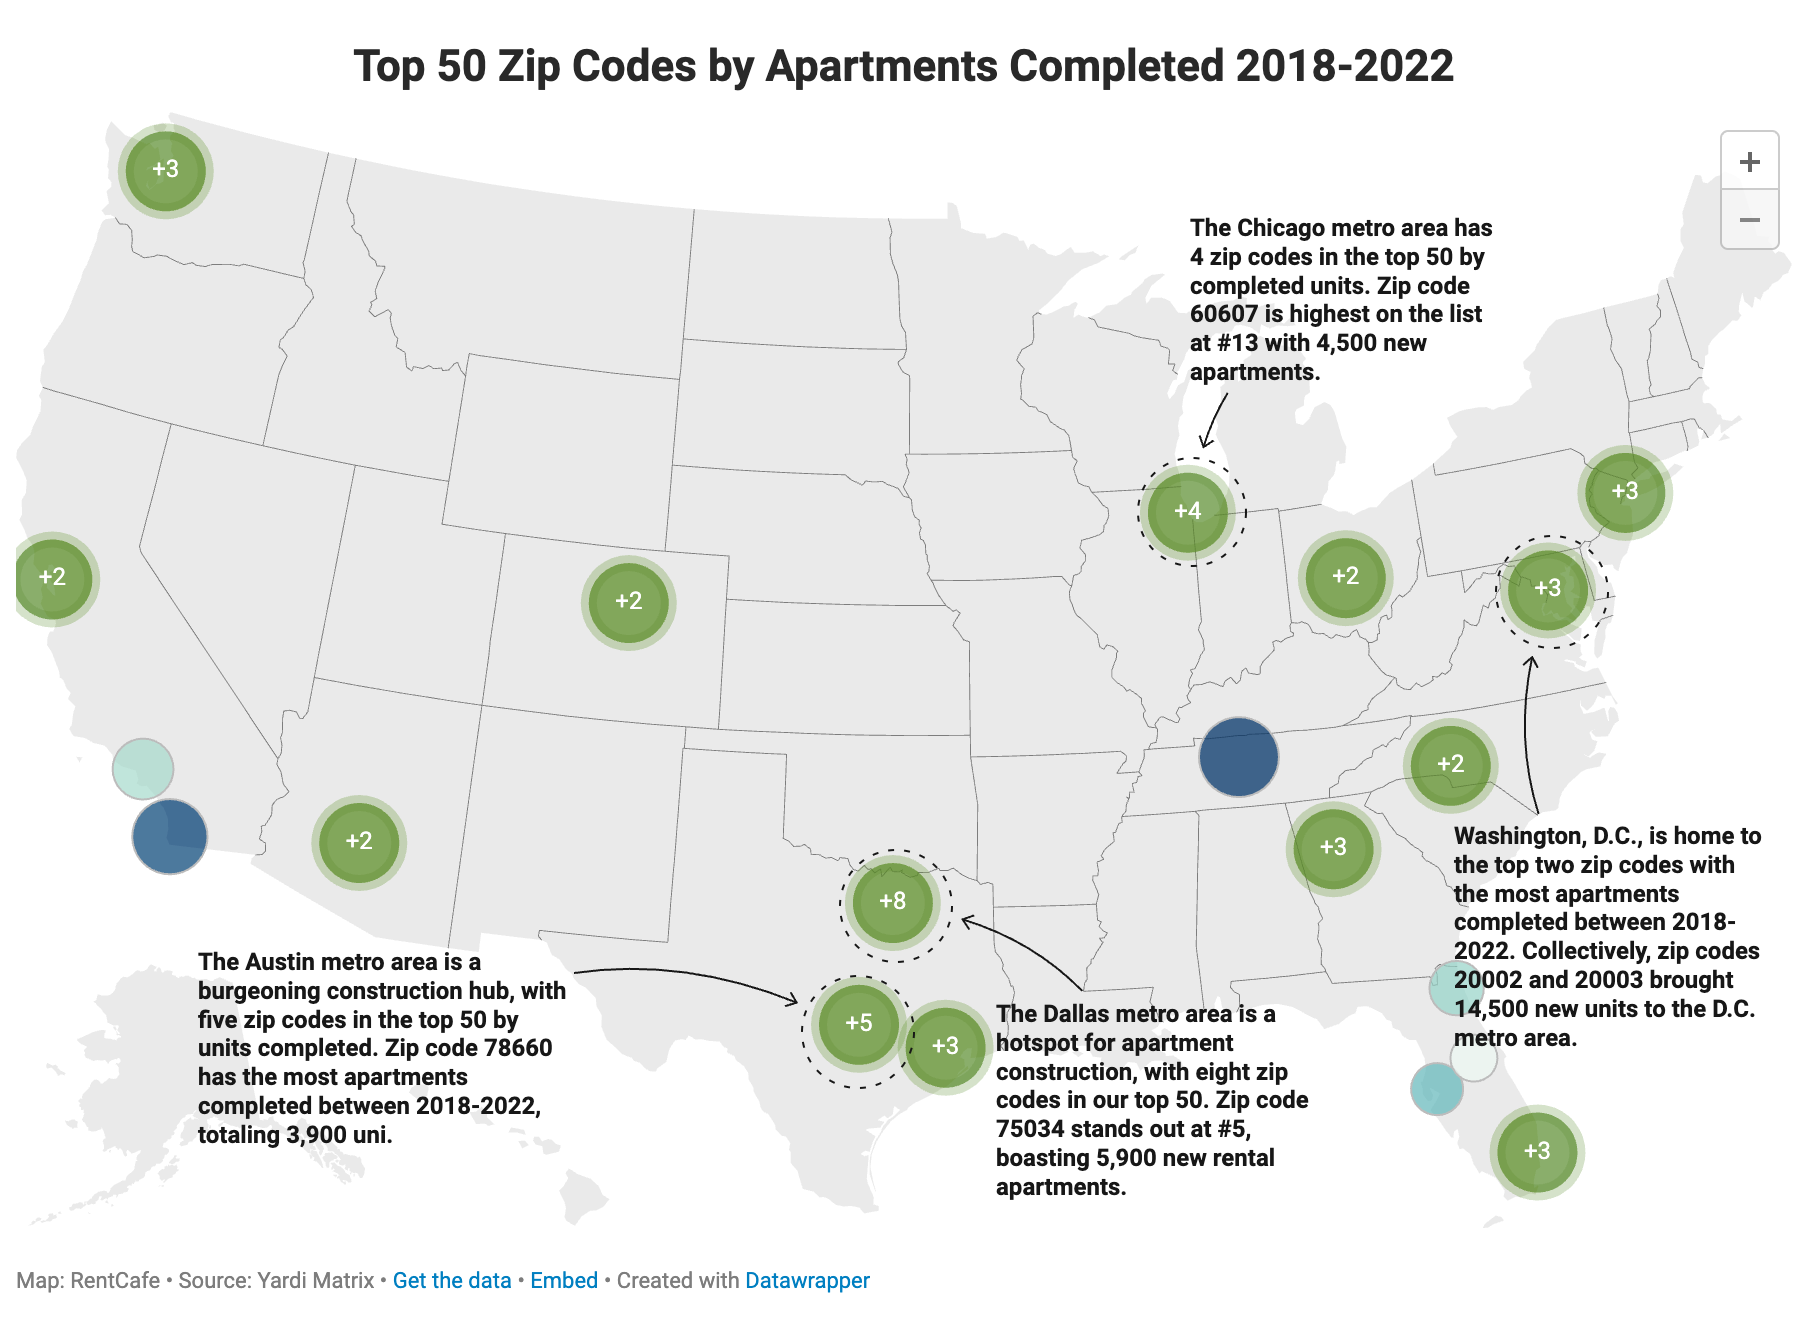 Washington, D.C., Queens, N.Y., lead in number of new apartments by zip code